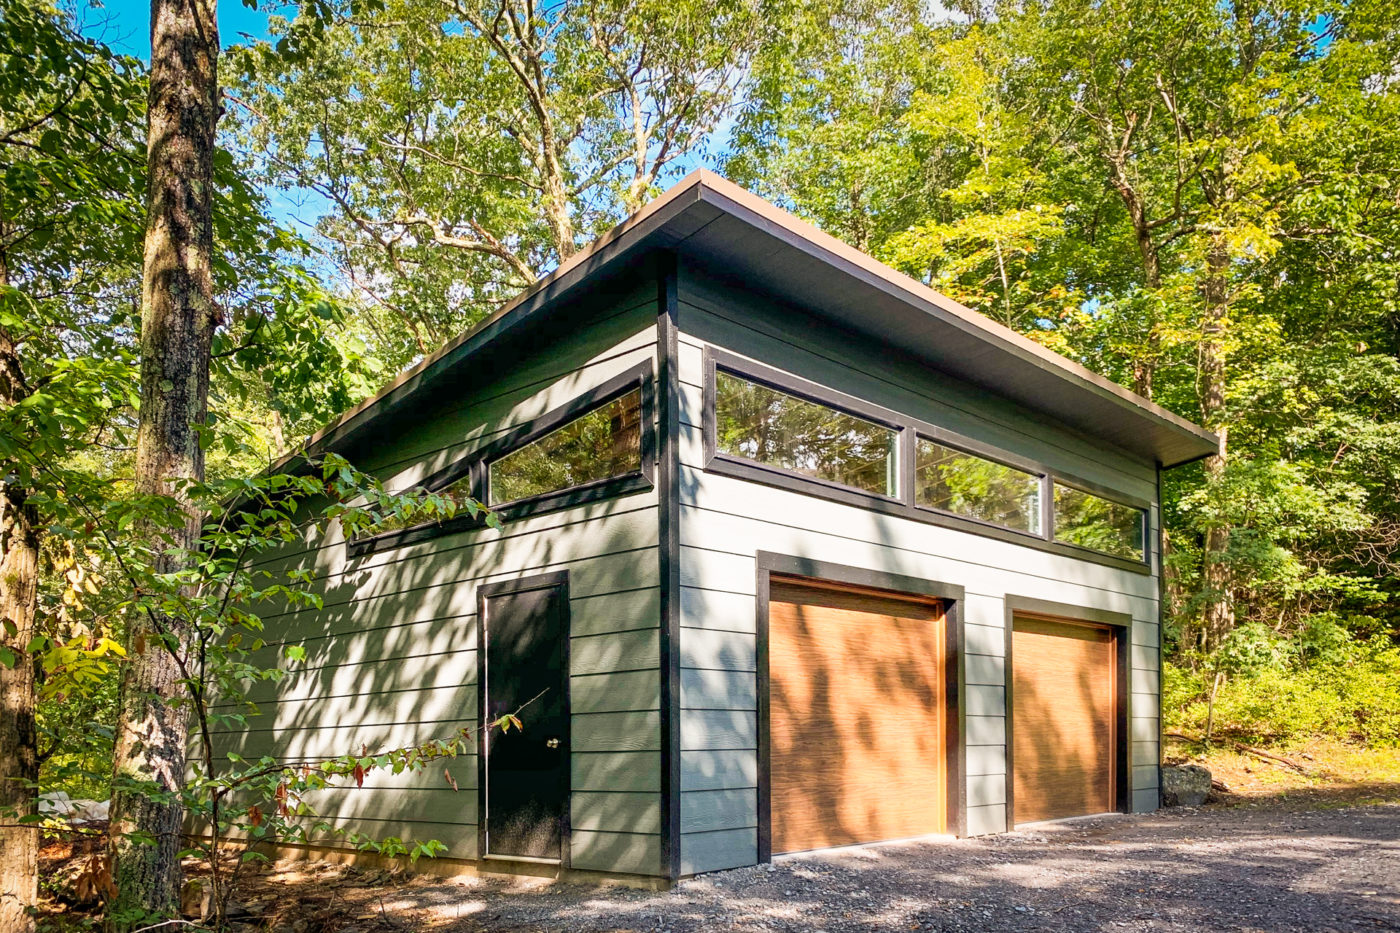 A modern 2-car garage for sale in PA, NY, MD, VA, NJ, NC, DE, RI, CT, MA, and beyond